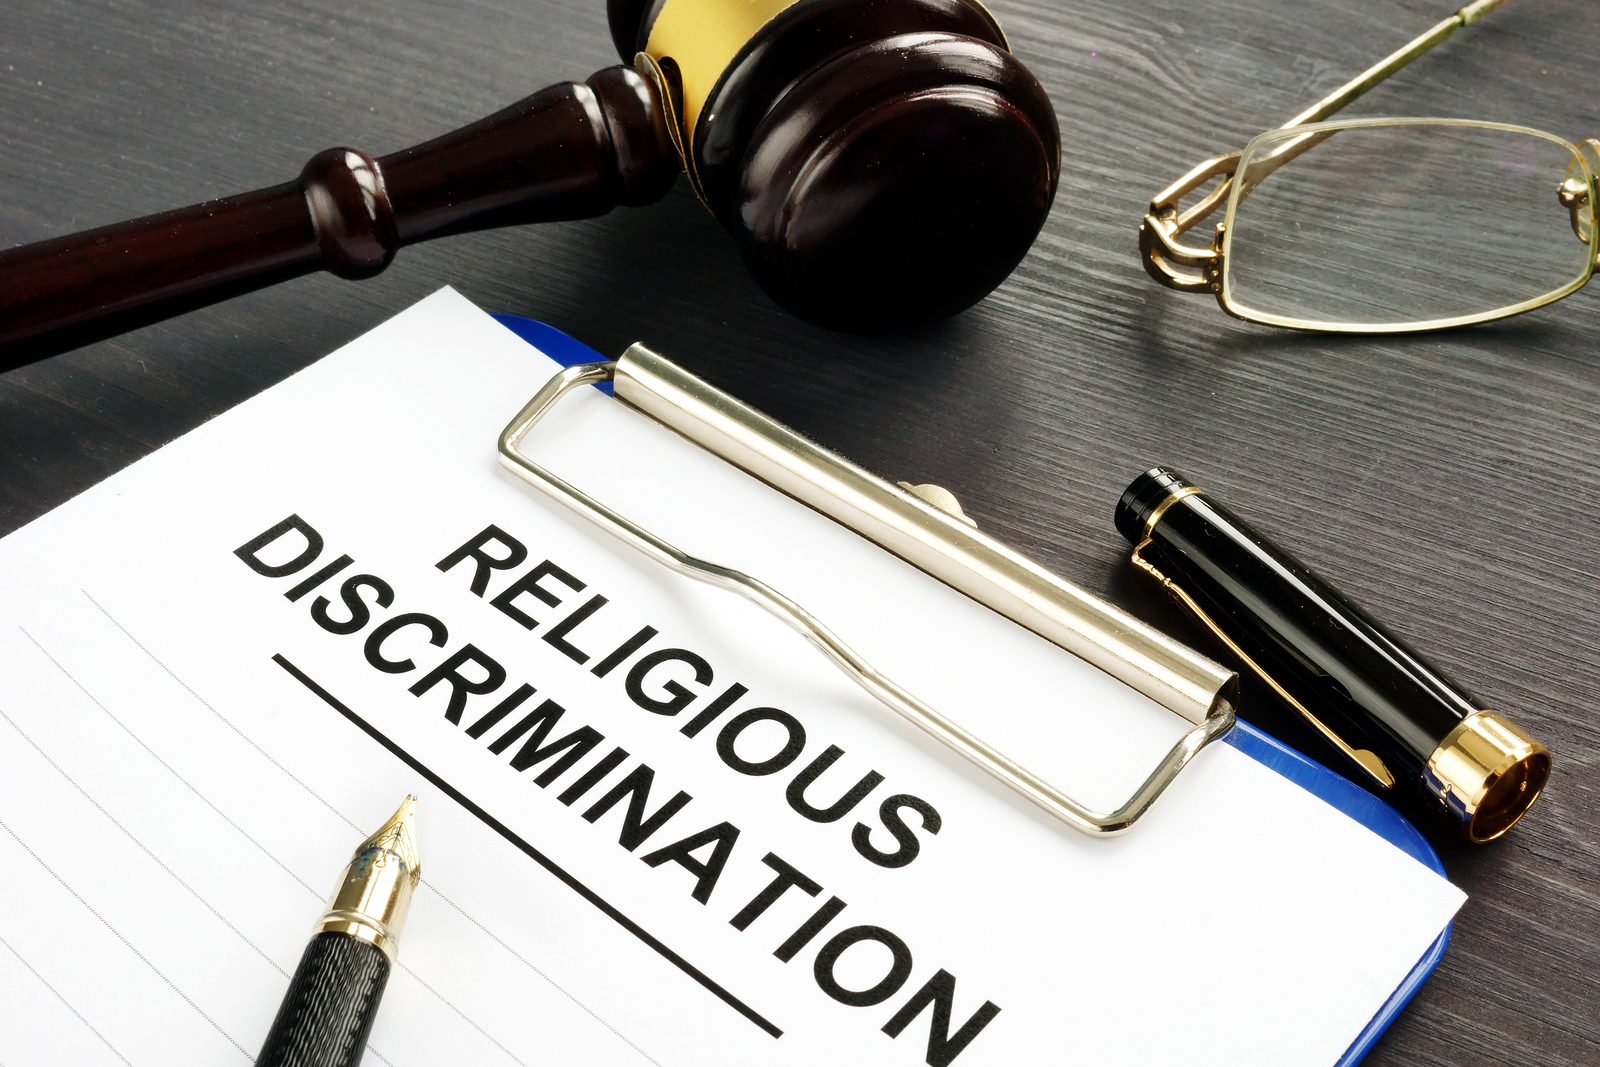 What is the burden of proof in a religious discrimination lawsuit